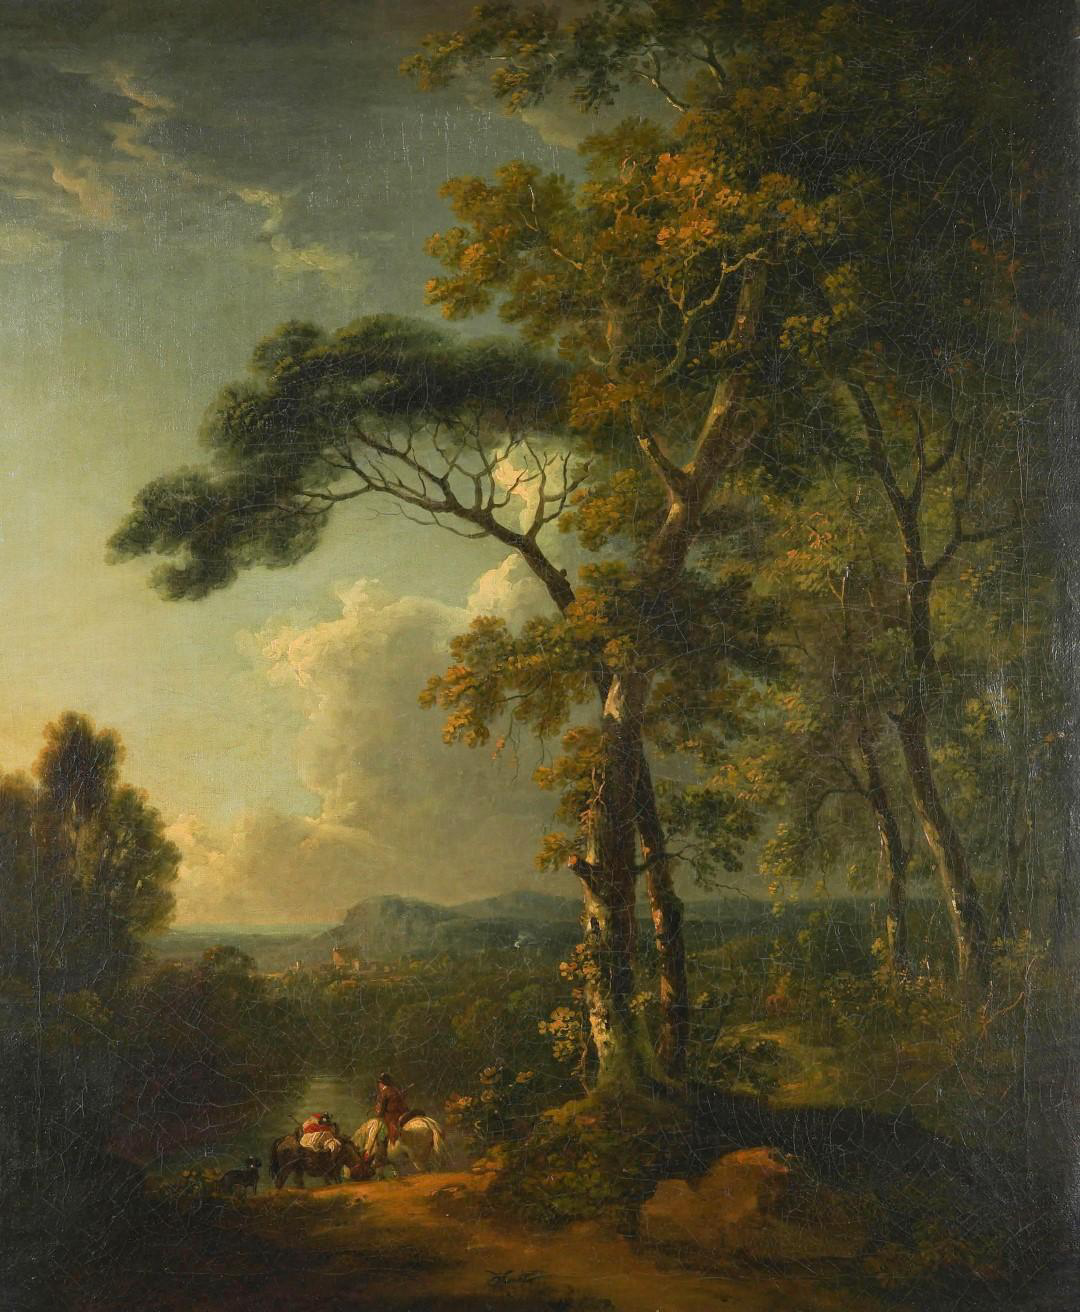 Landscape painting from the Shakenhurst Hall Collection